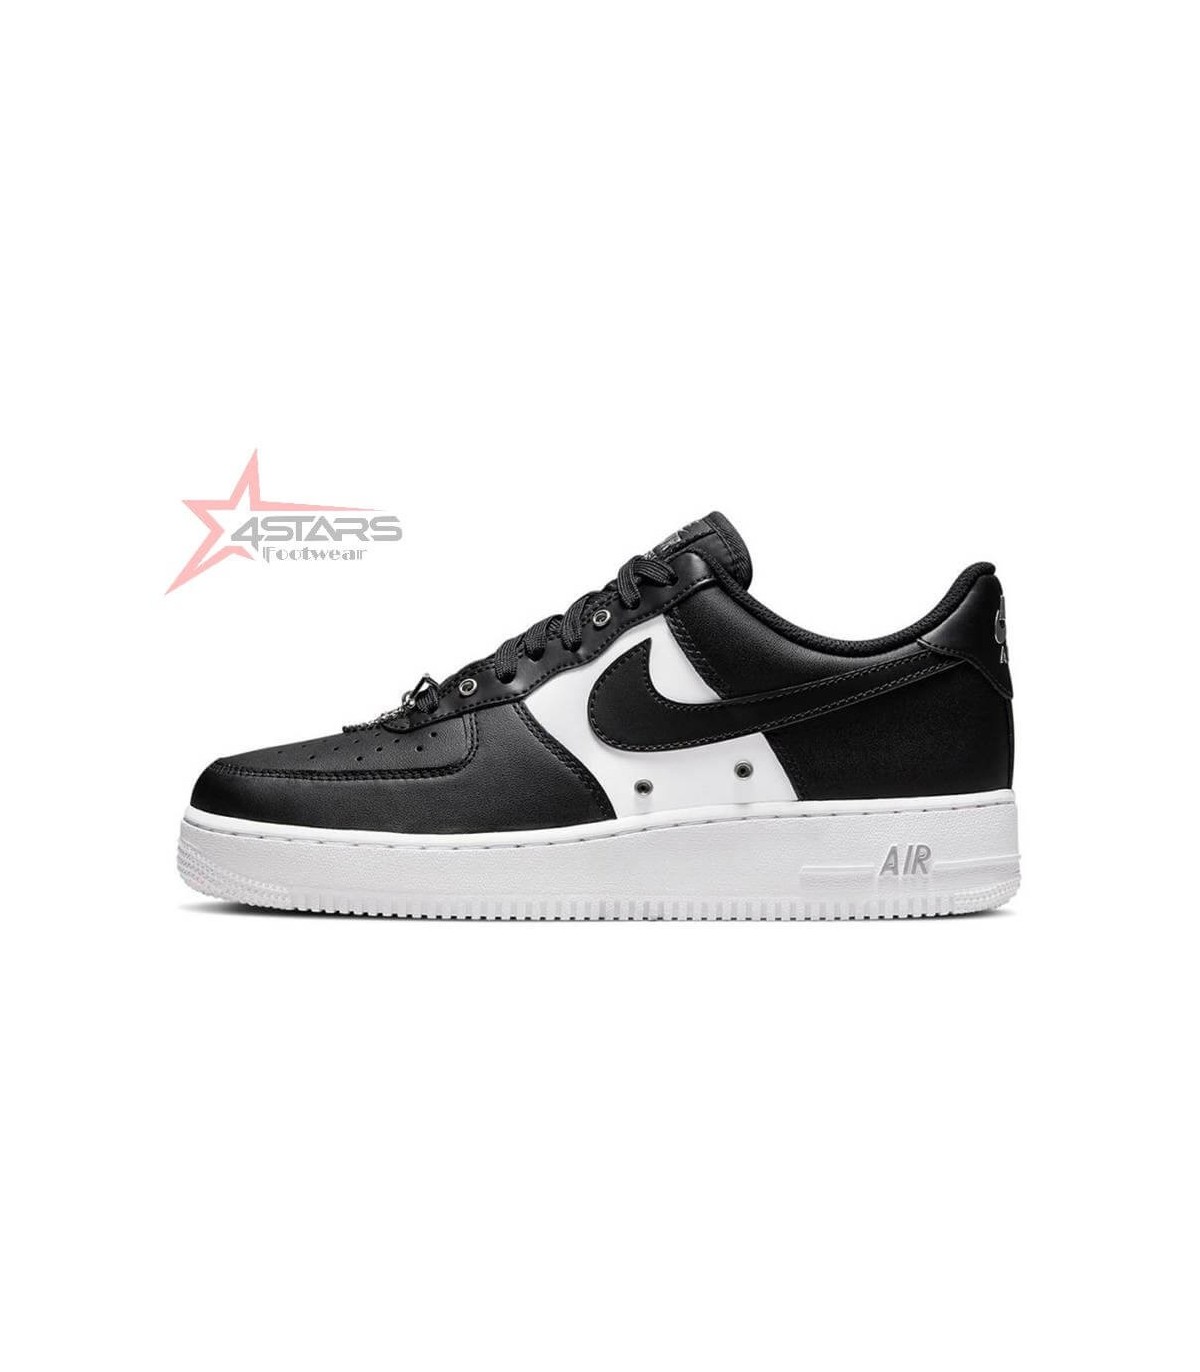 Nike Air Force 1 '07 Snap Button Bling Black White